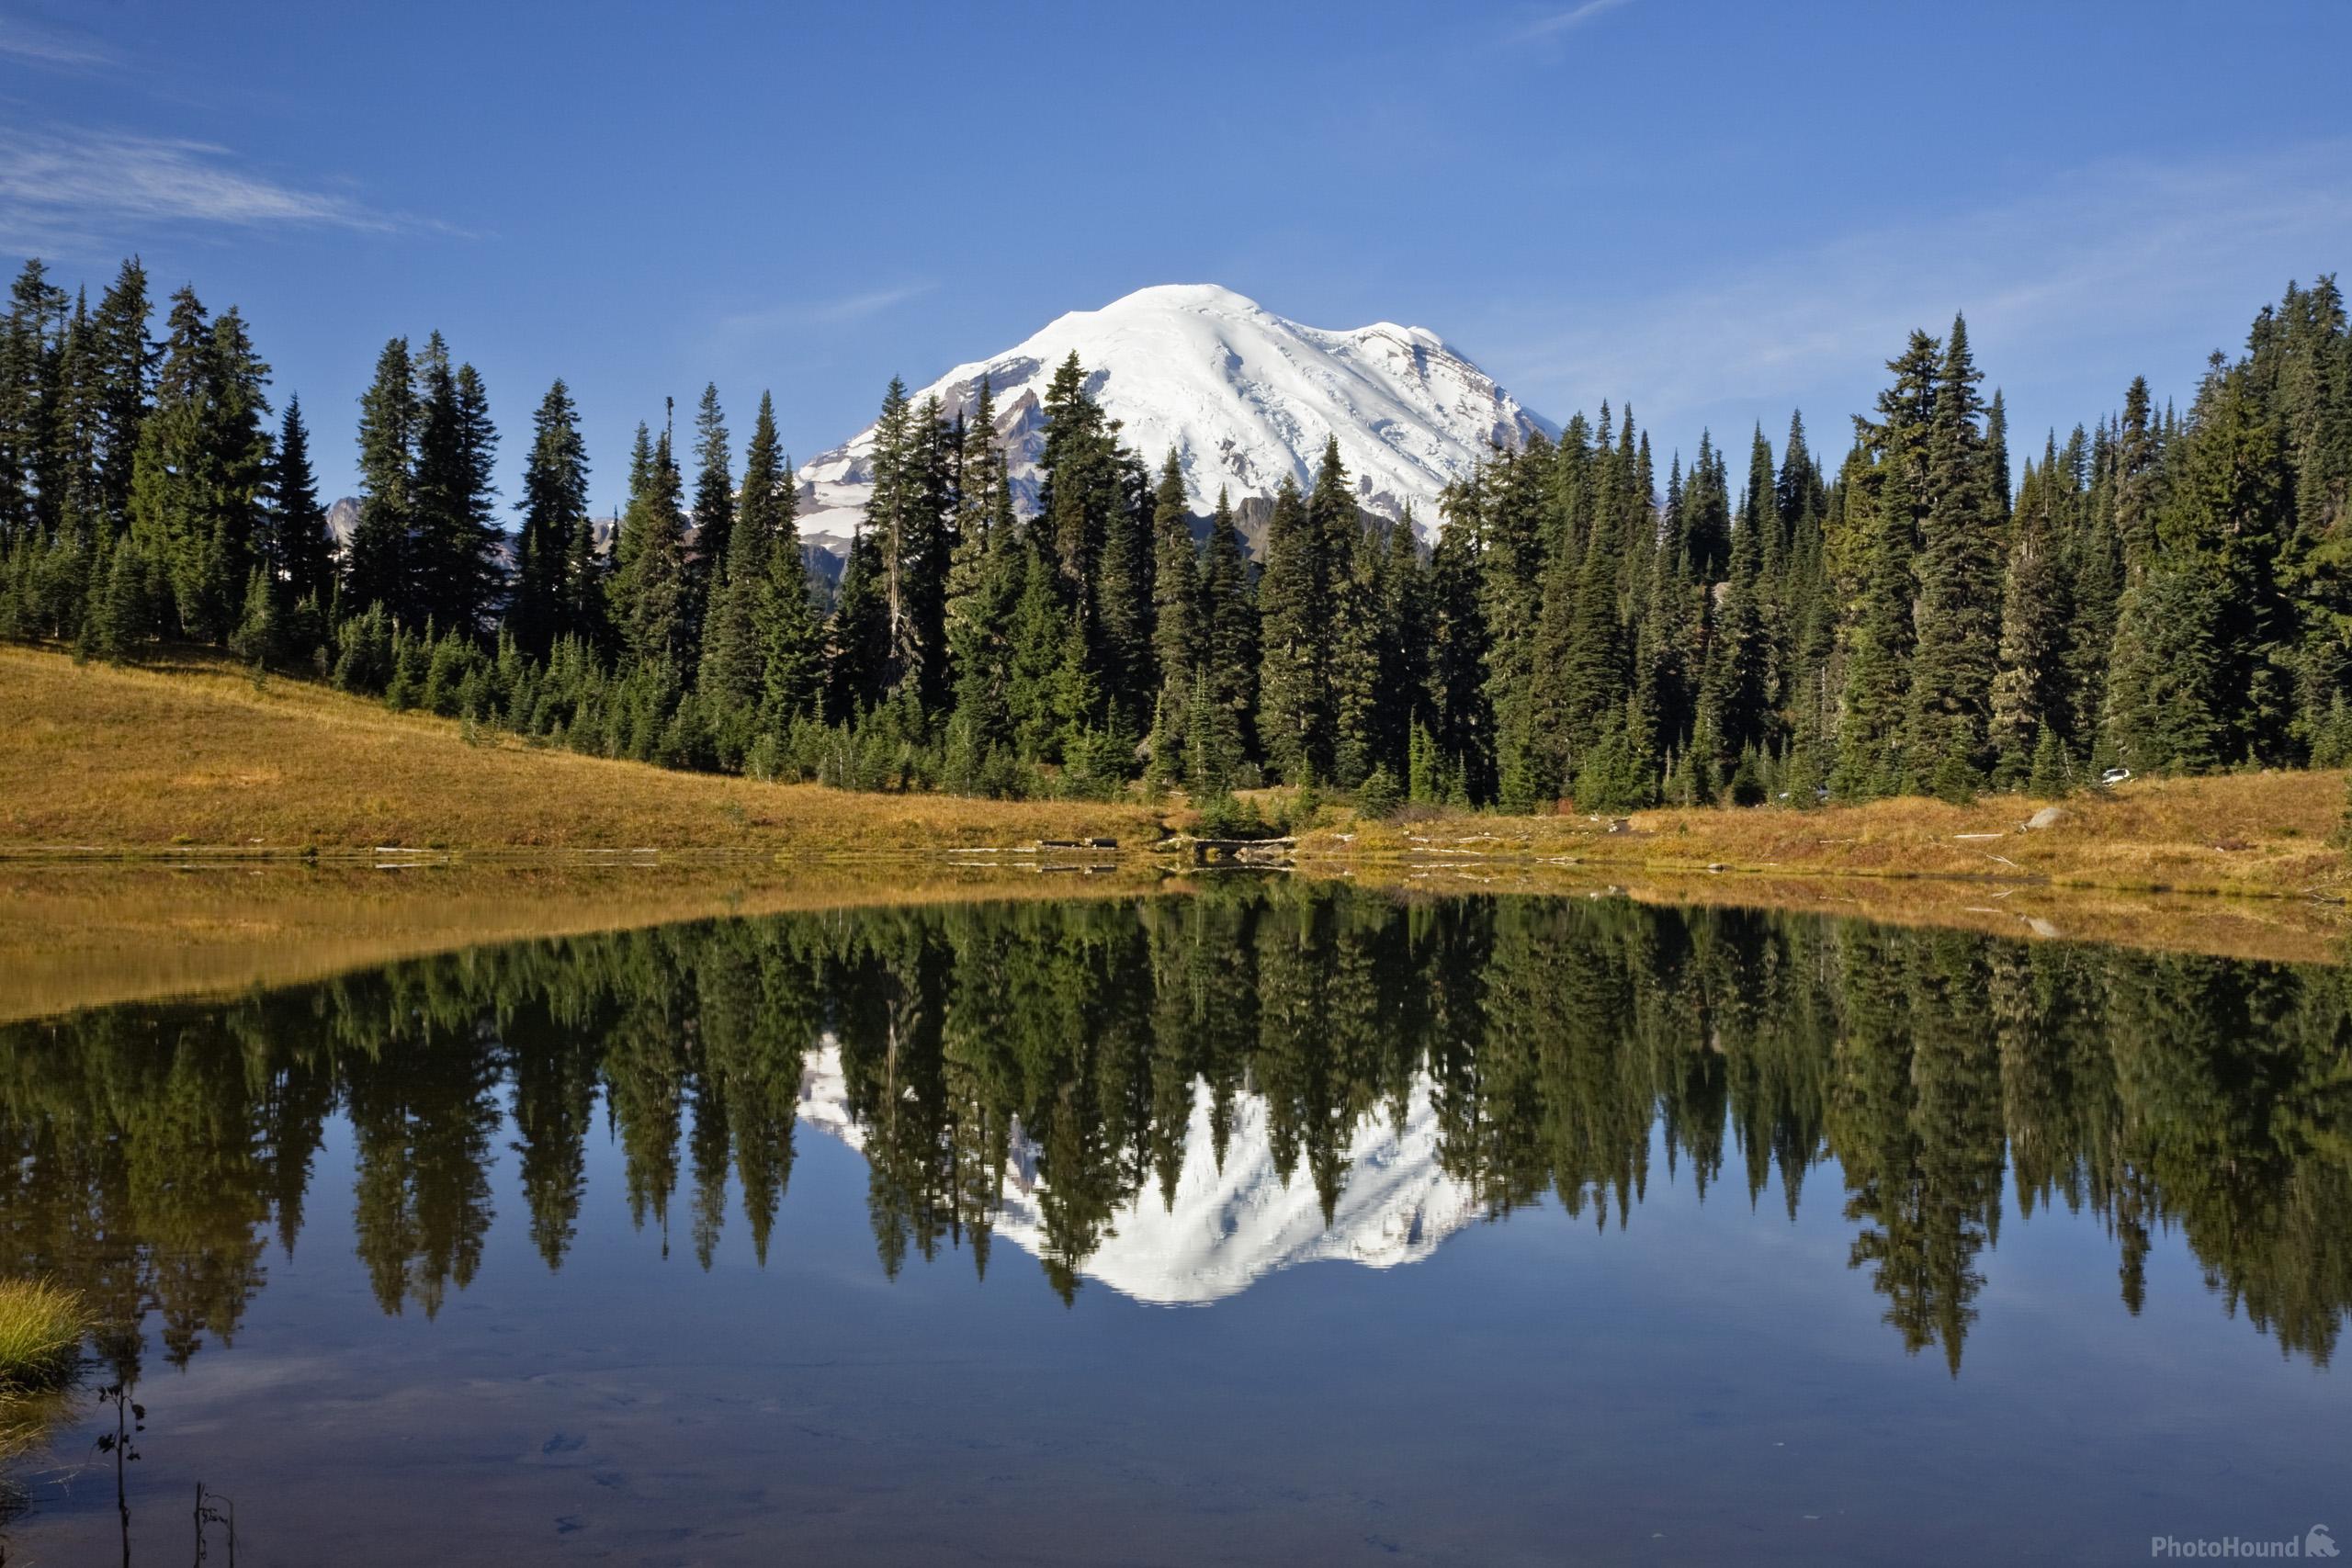 Image of Tipsoo Lake, Mount Rainier National Park by T. Kirkendall and V. Spring